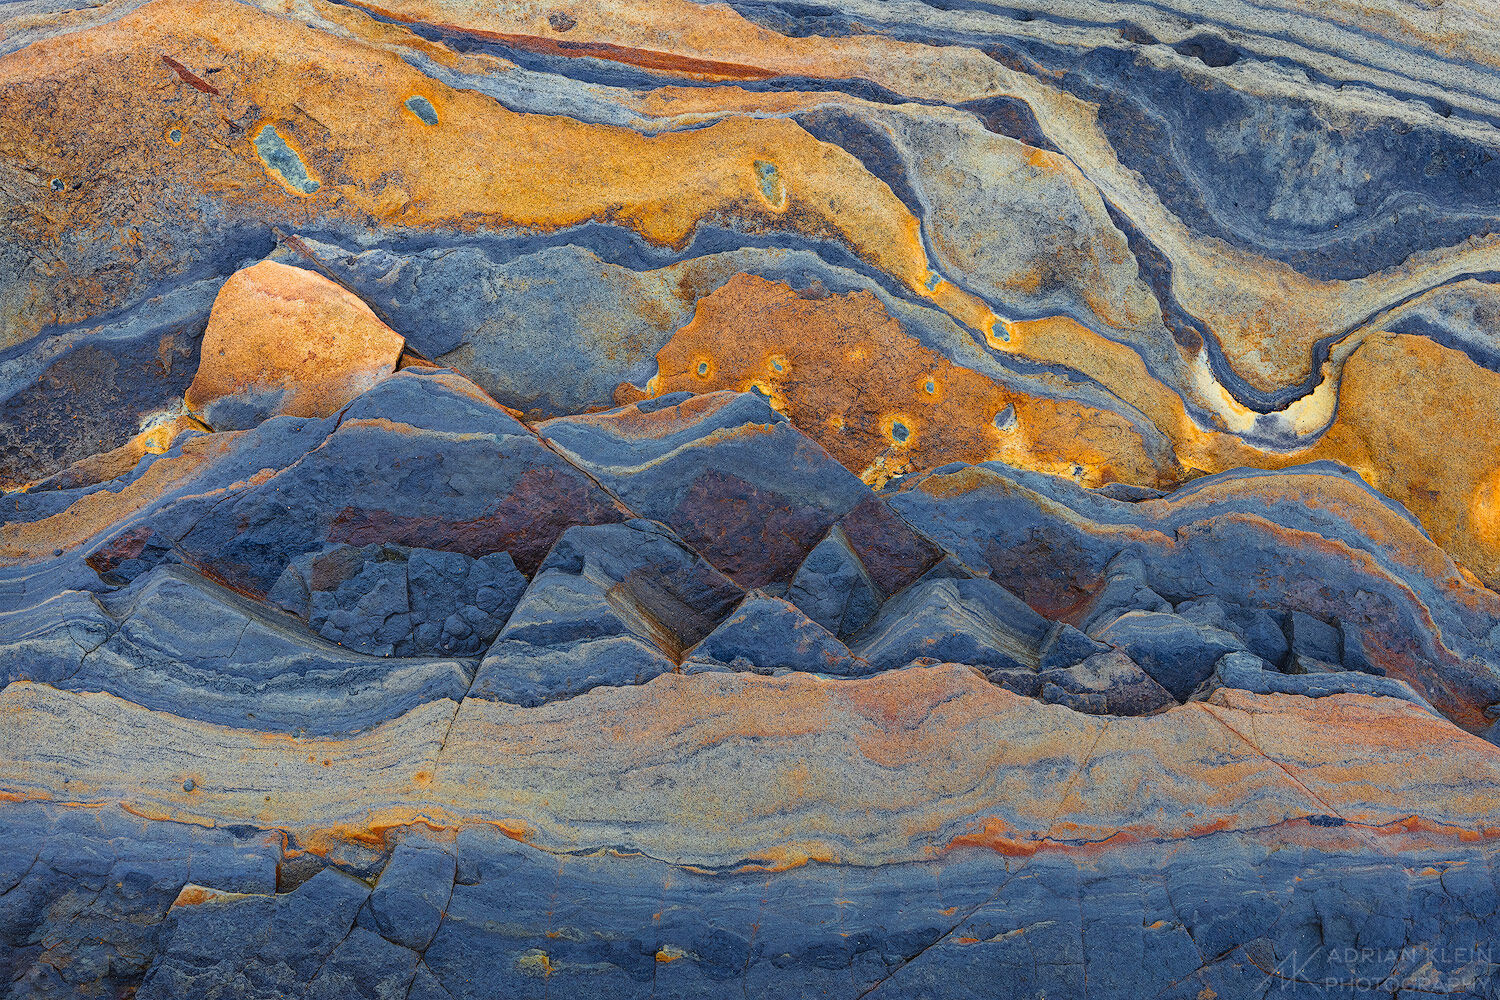 Layers of sandstone that resemble a mountain with a sunrise sky. Limited Edition of 100.